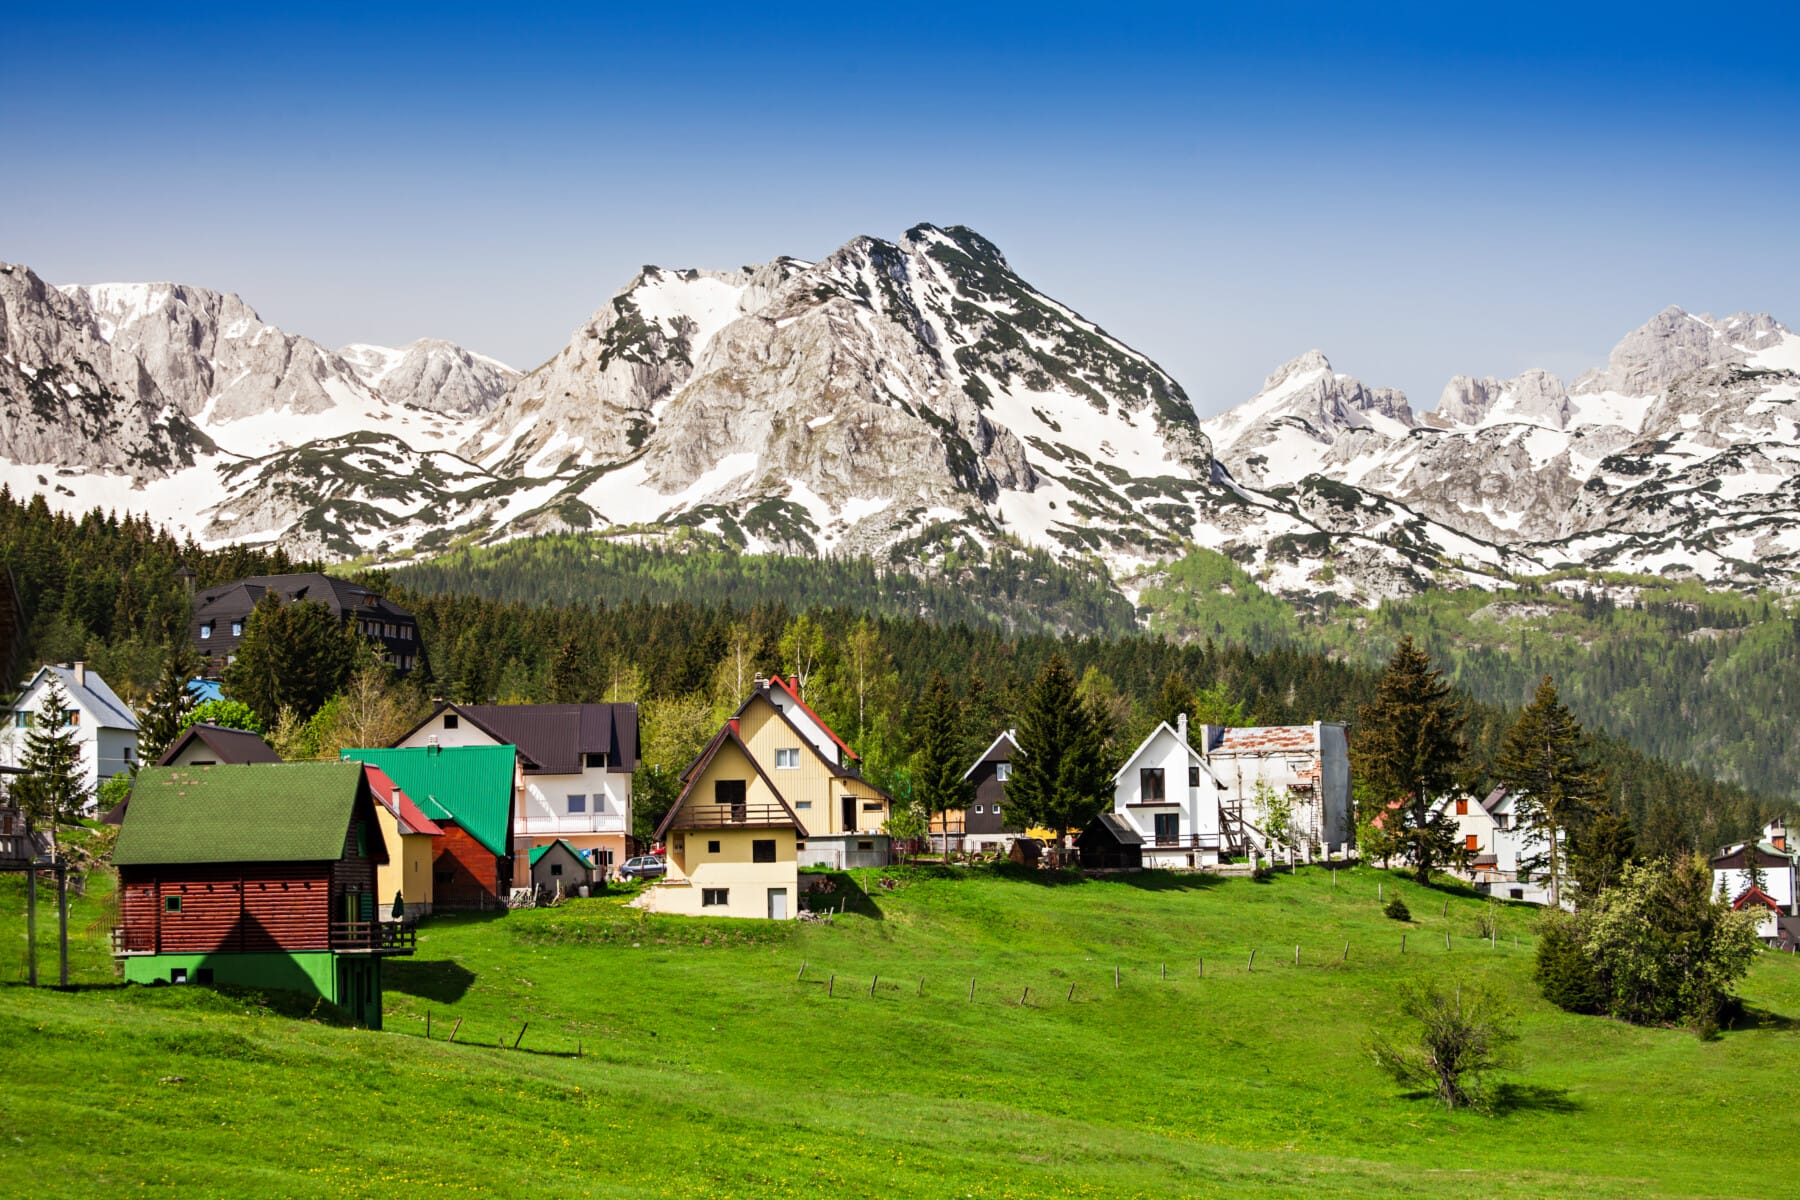 Amazing view on Durmitor mountain and houses under mountain, Žabljak